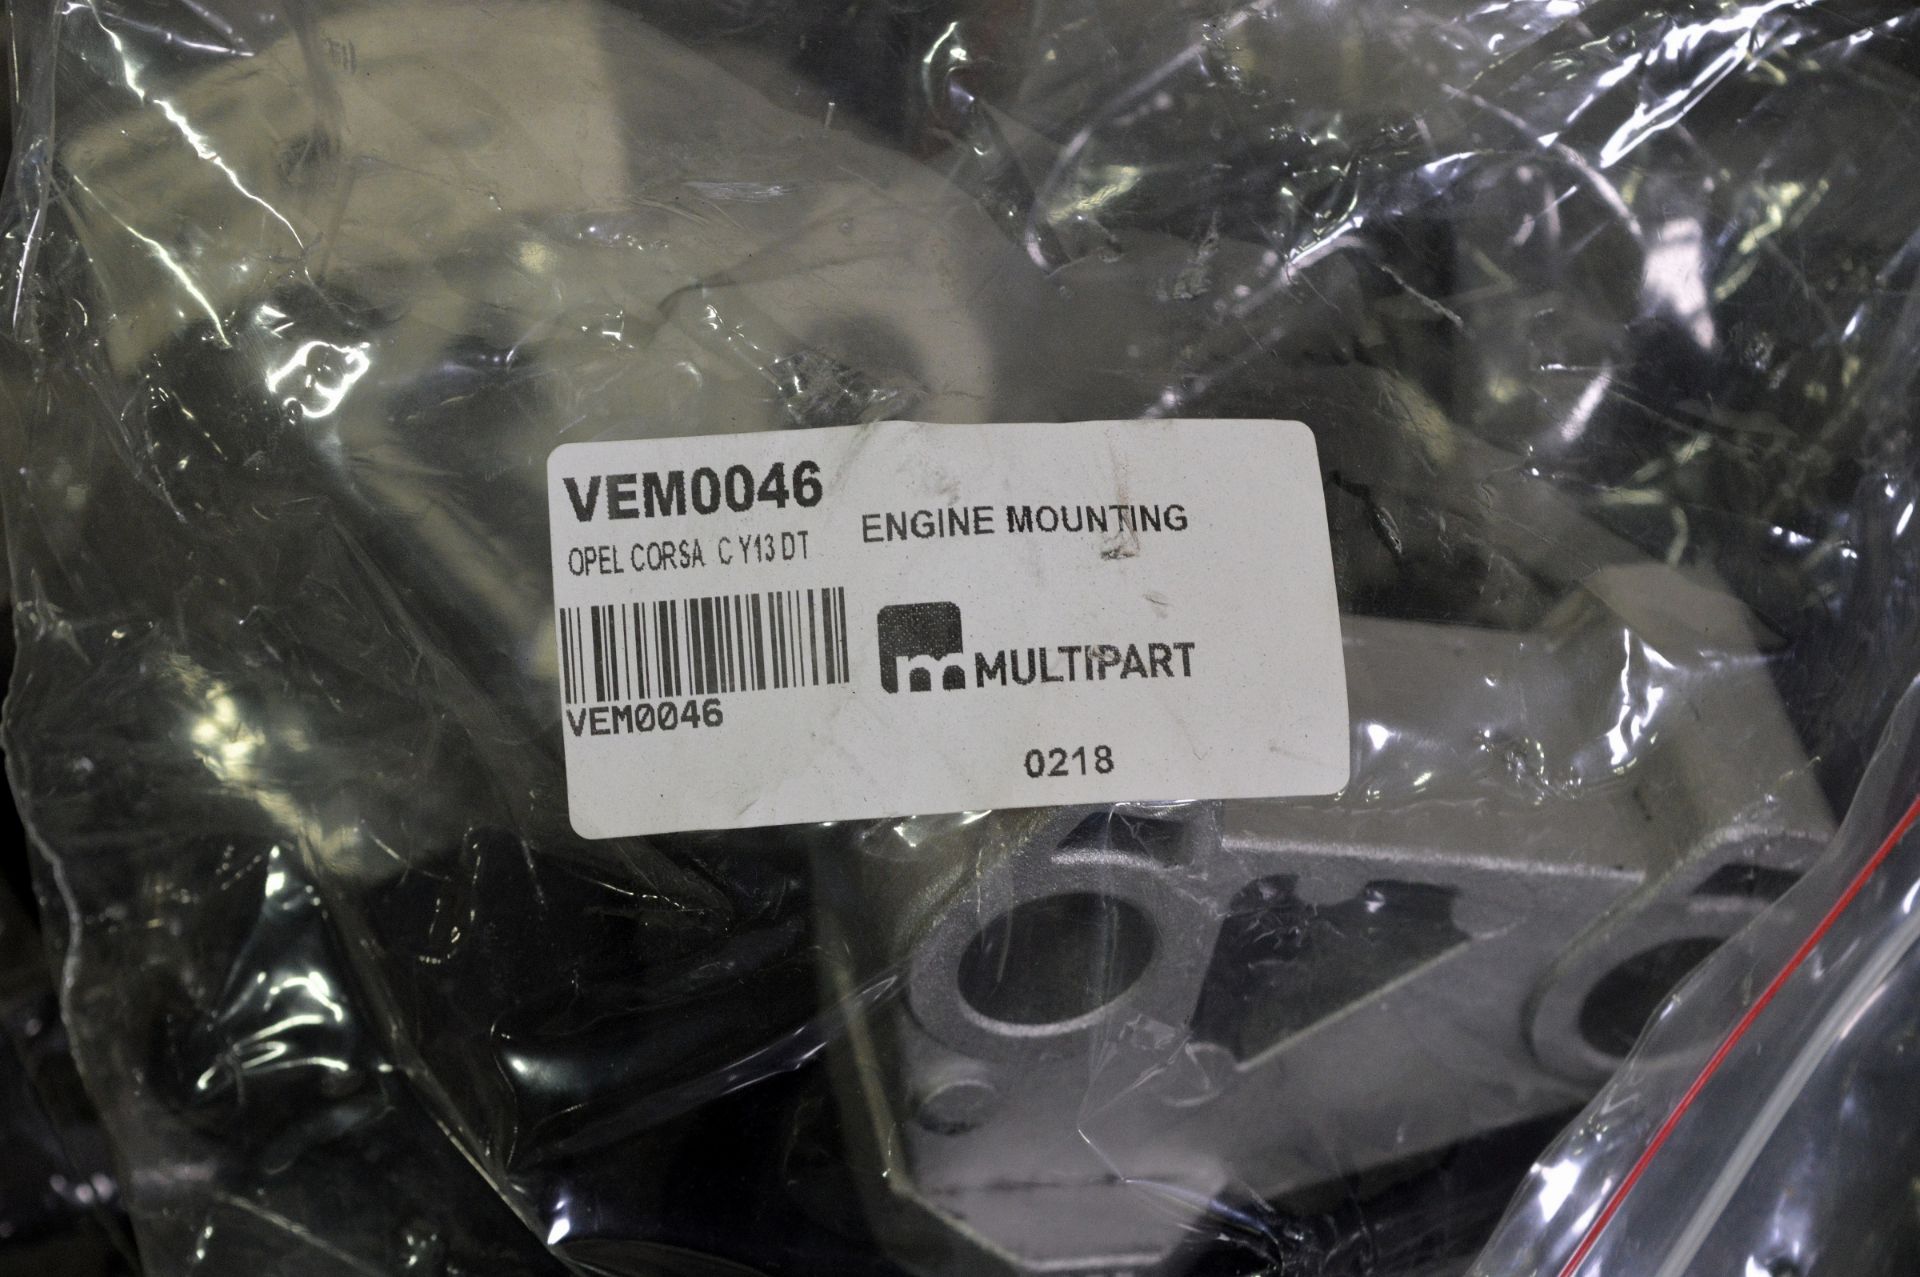 Vehicle parts - brake drums, engine mounts - see picture for itinerary for model numbers - Image 4 of 6